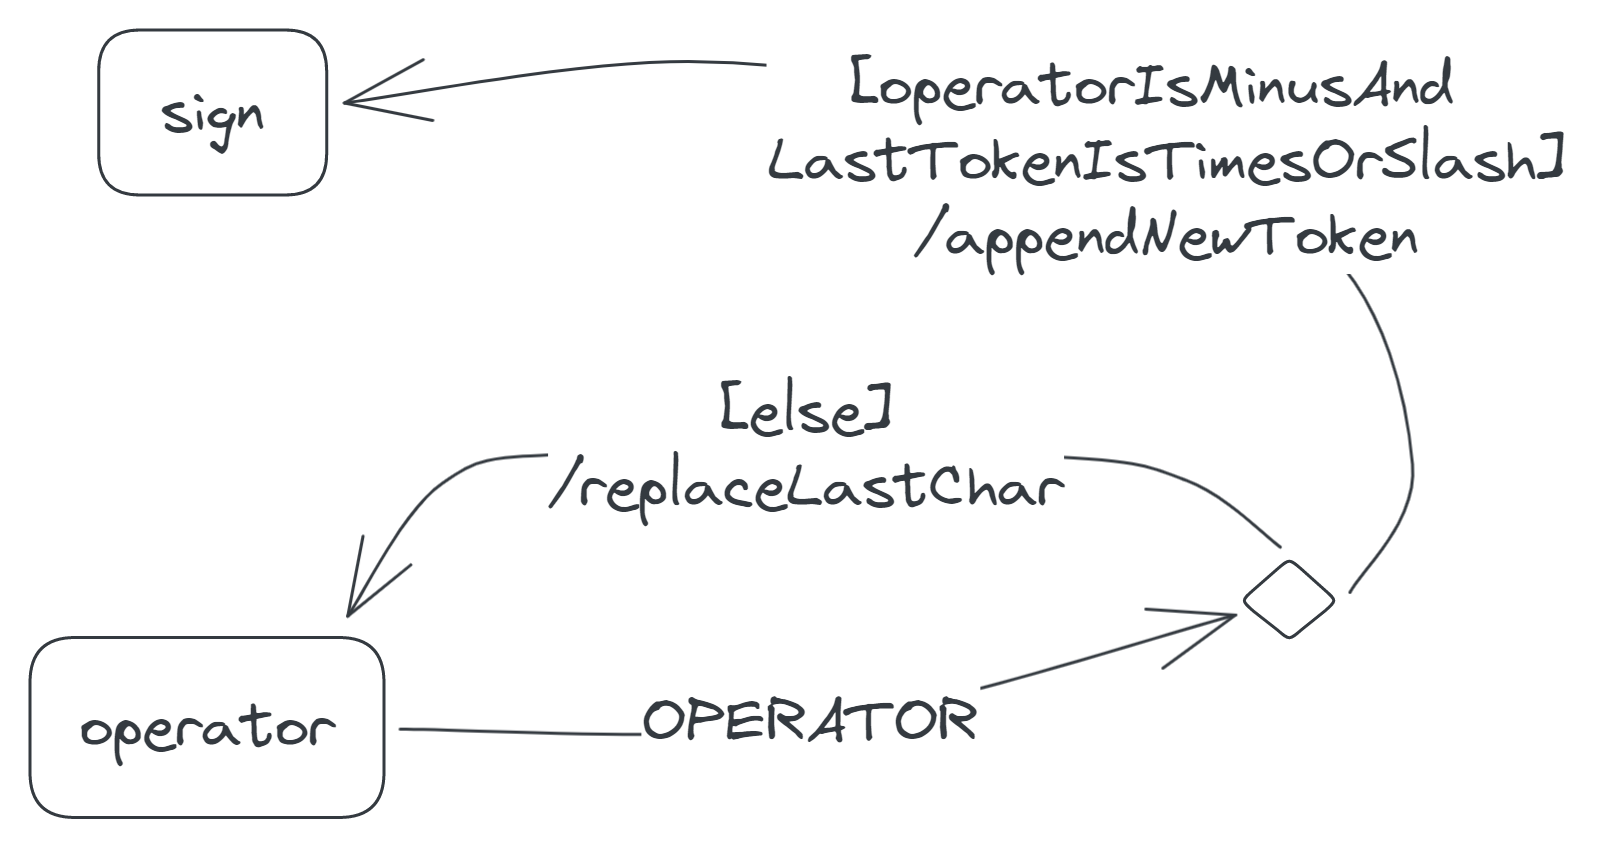 Two transitions from the operator state. One is labelled 'OPERATOR[operatorIsMinusAndLastTokenIsMinusOrSlash]/appendNewToken', while the other is labelled '[else]/replaceLastChar'.